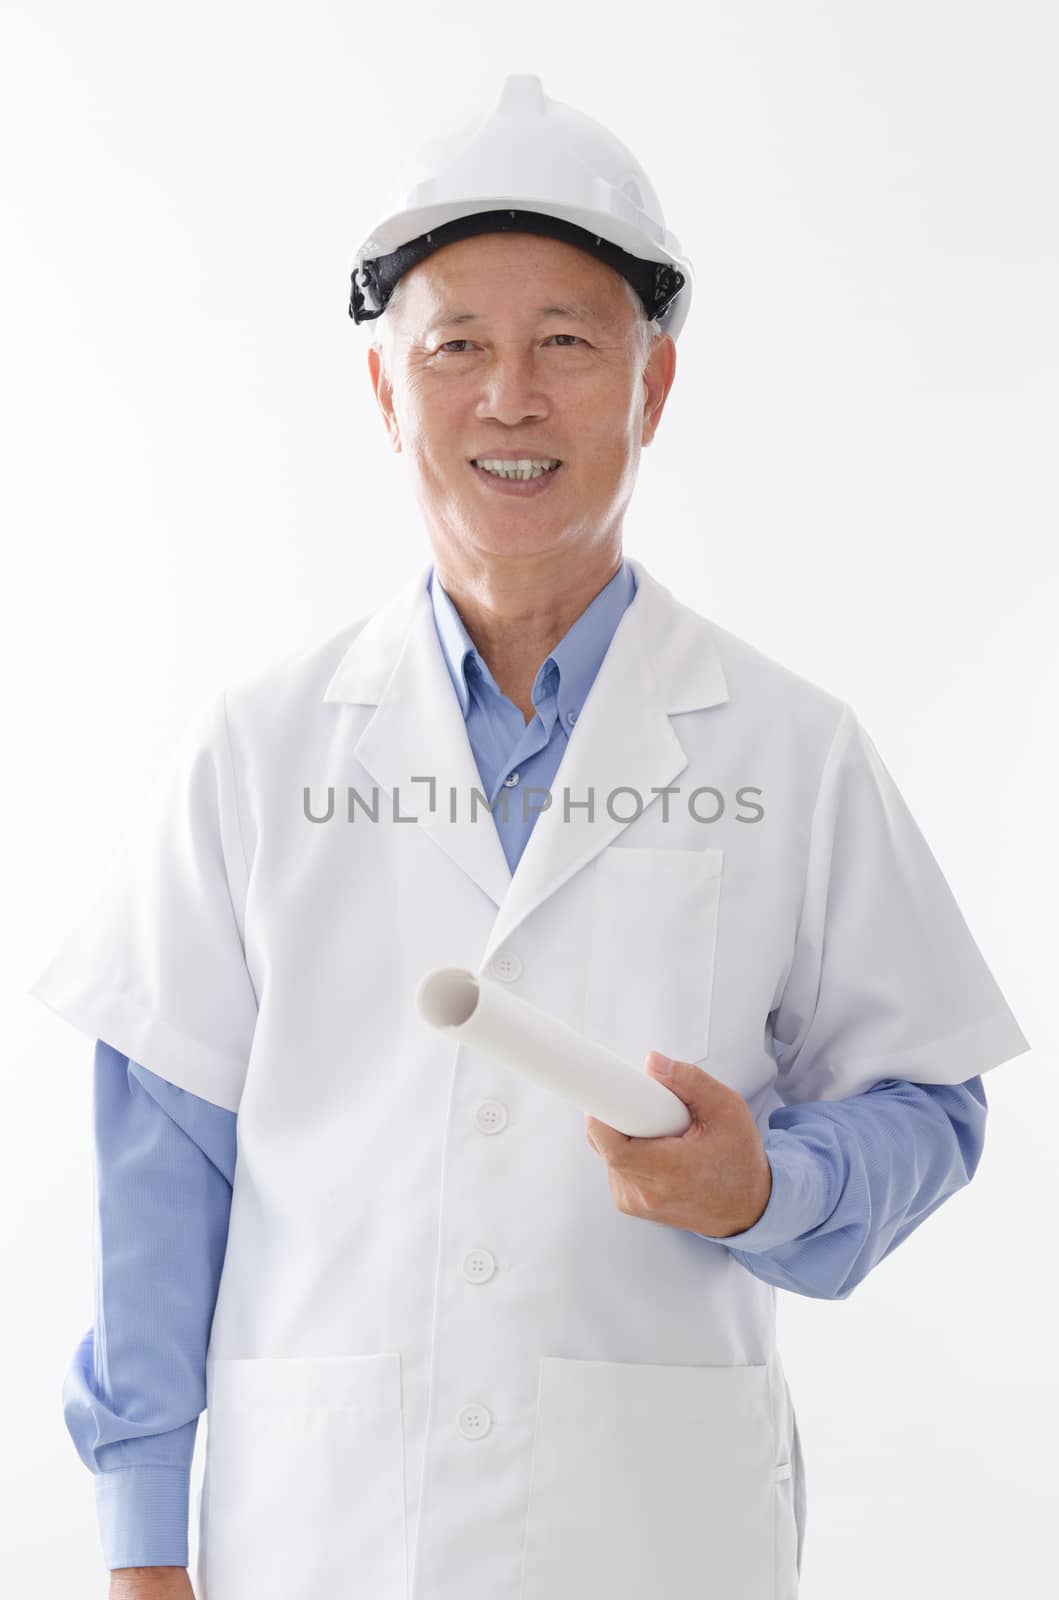 Portrait of Asian contractor with hard hat and blueprint smiling, standing isolated on white background.